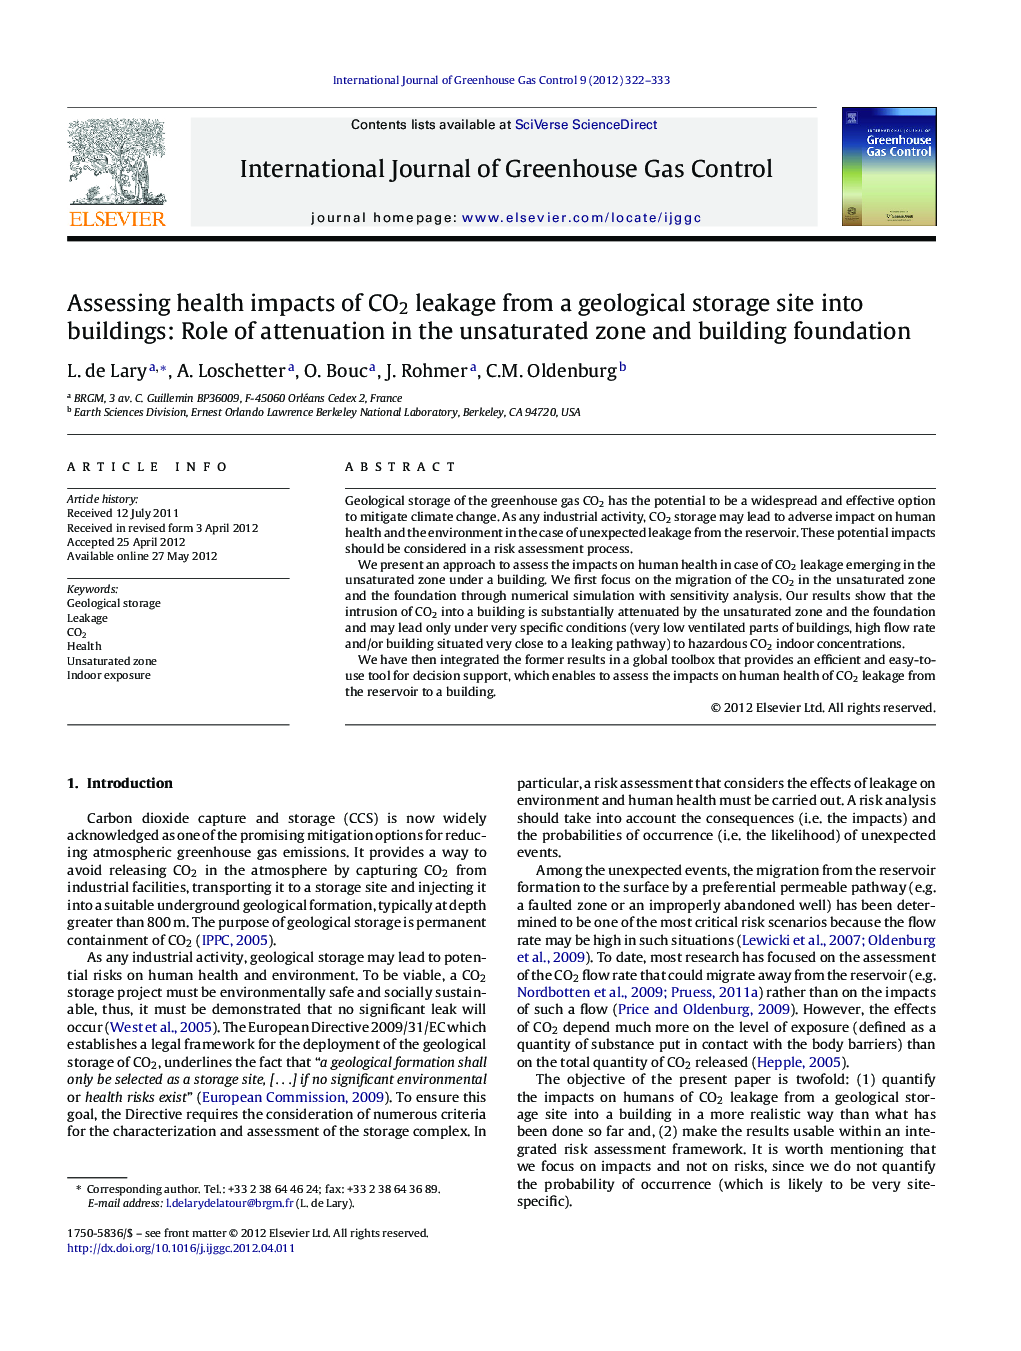 Assessing health impacts of CO2 leakage from a geological storage site into buildings: Role of attenuation in the unsaturated zone and building foundation